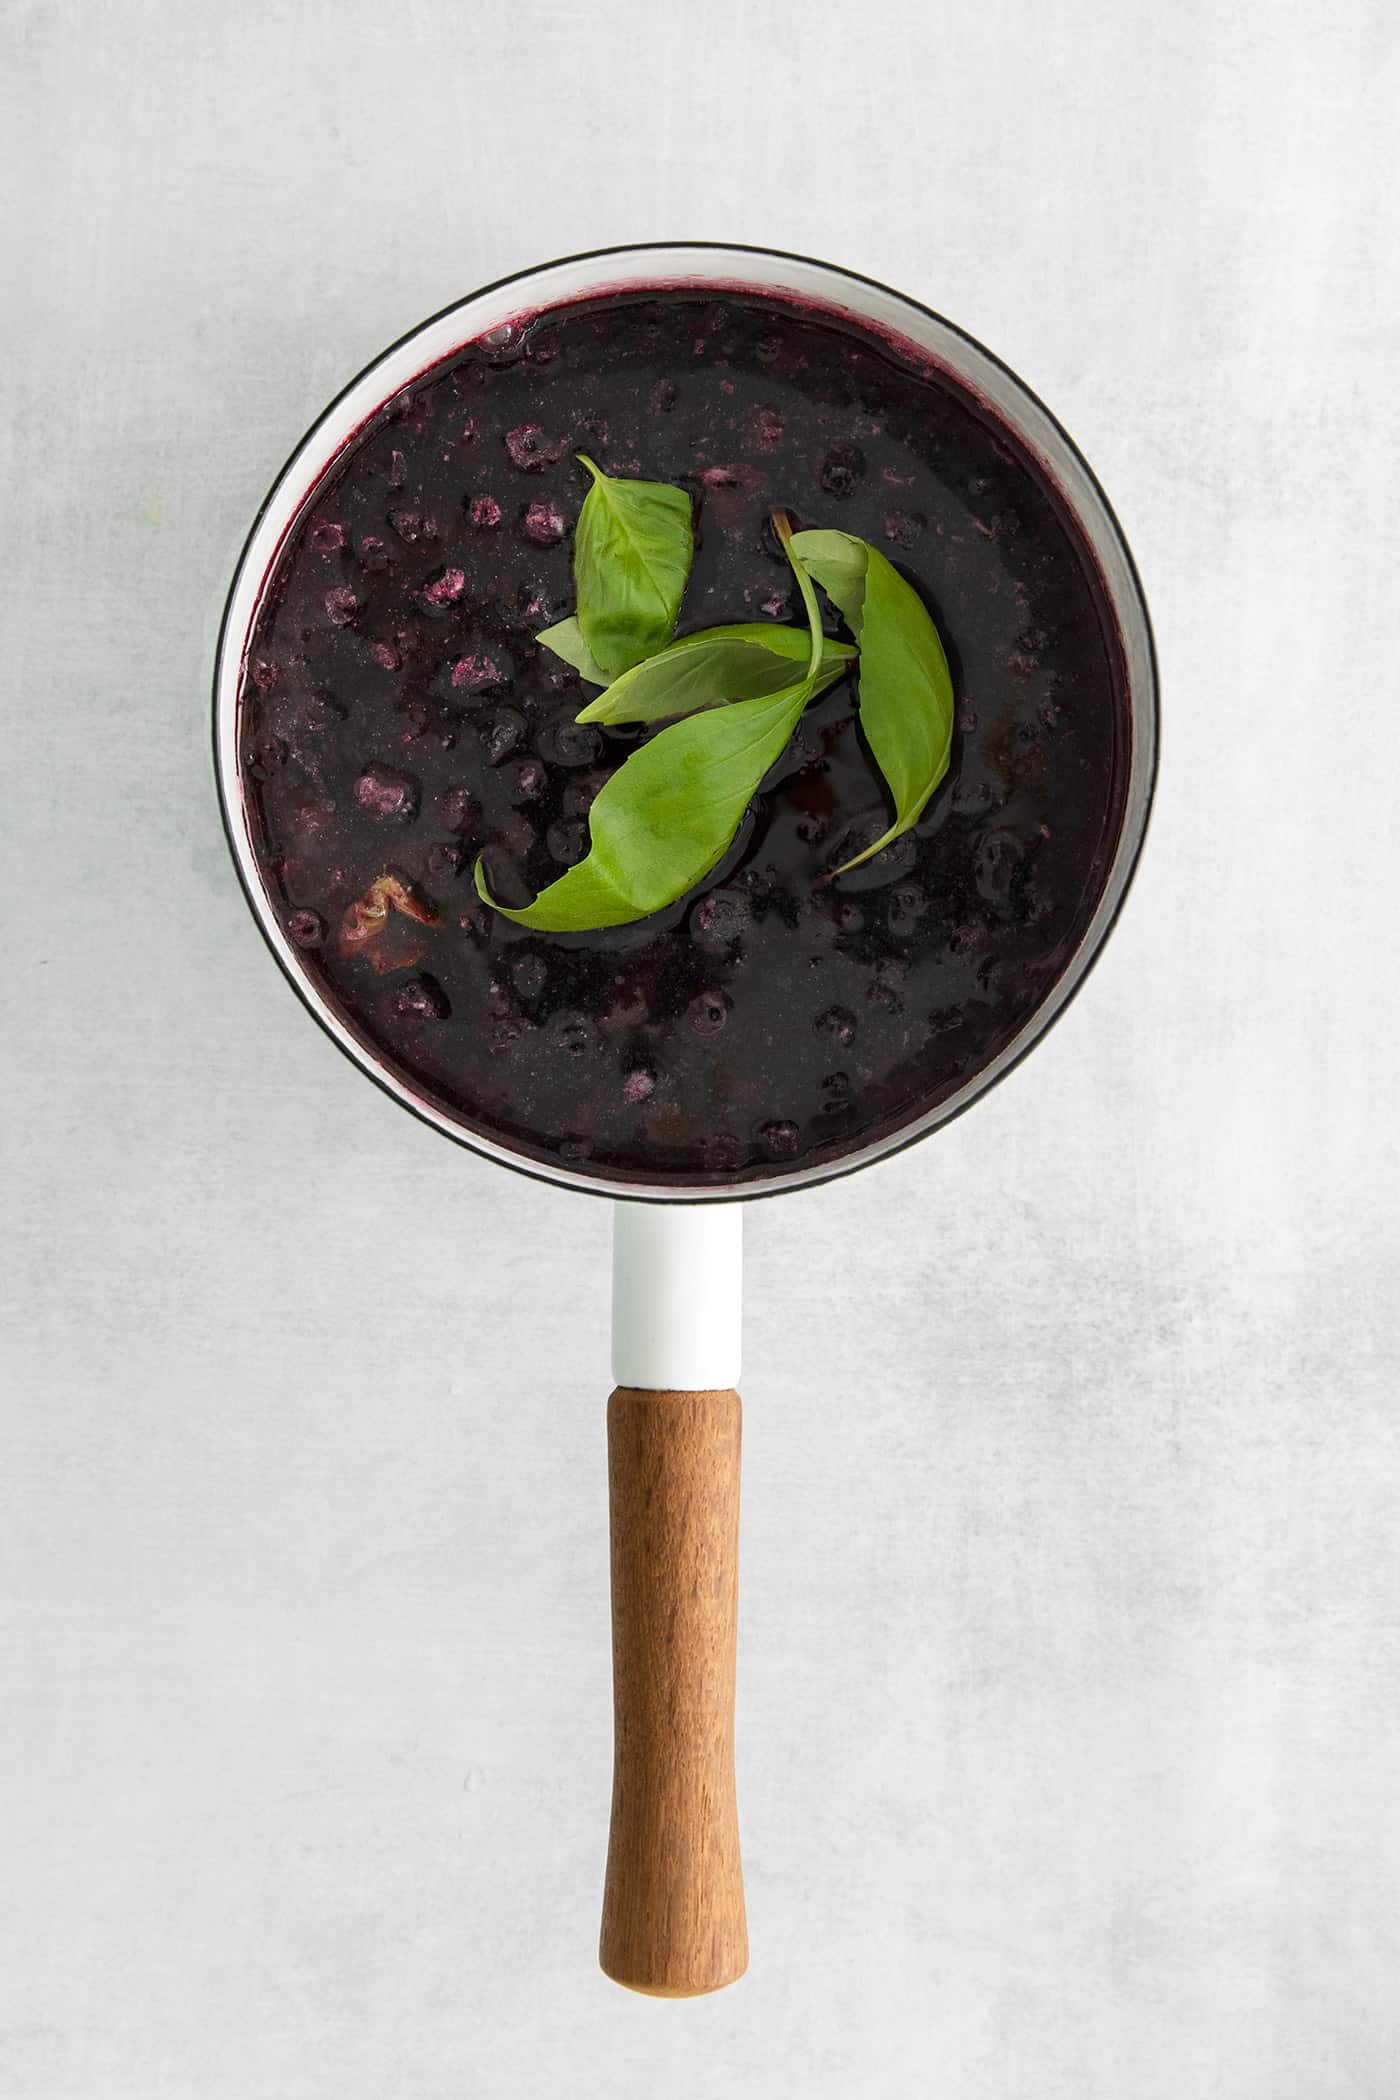 Blueberry syrup with basil in a saucepan